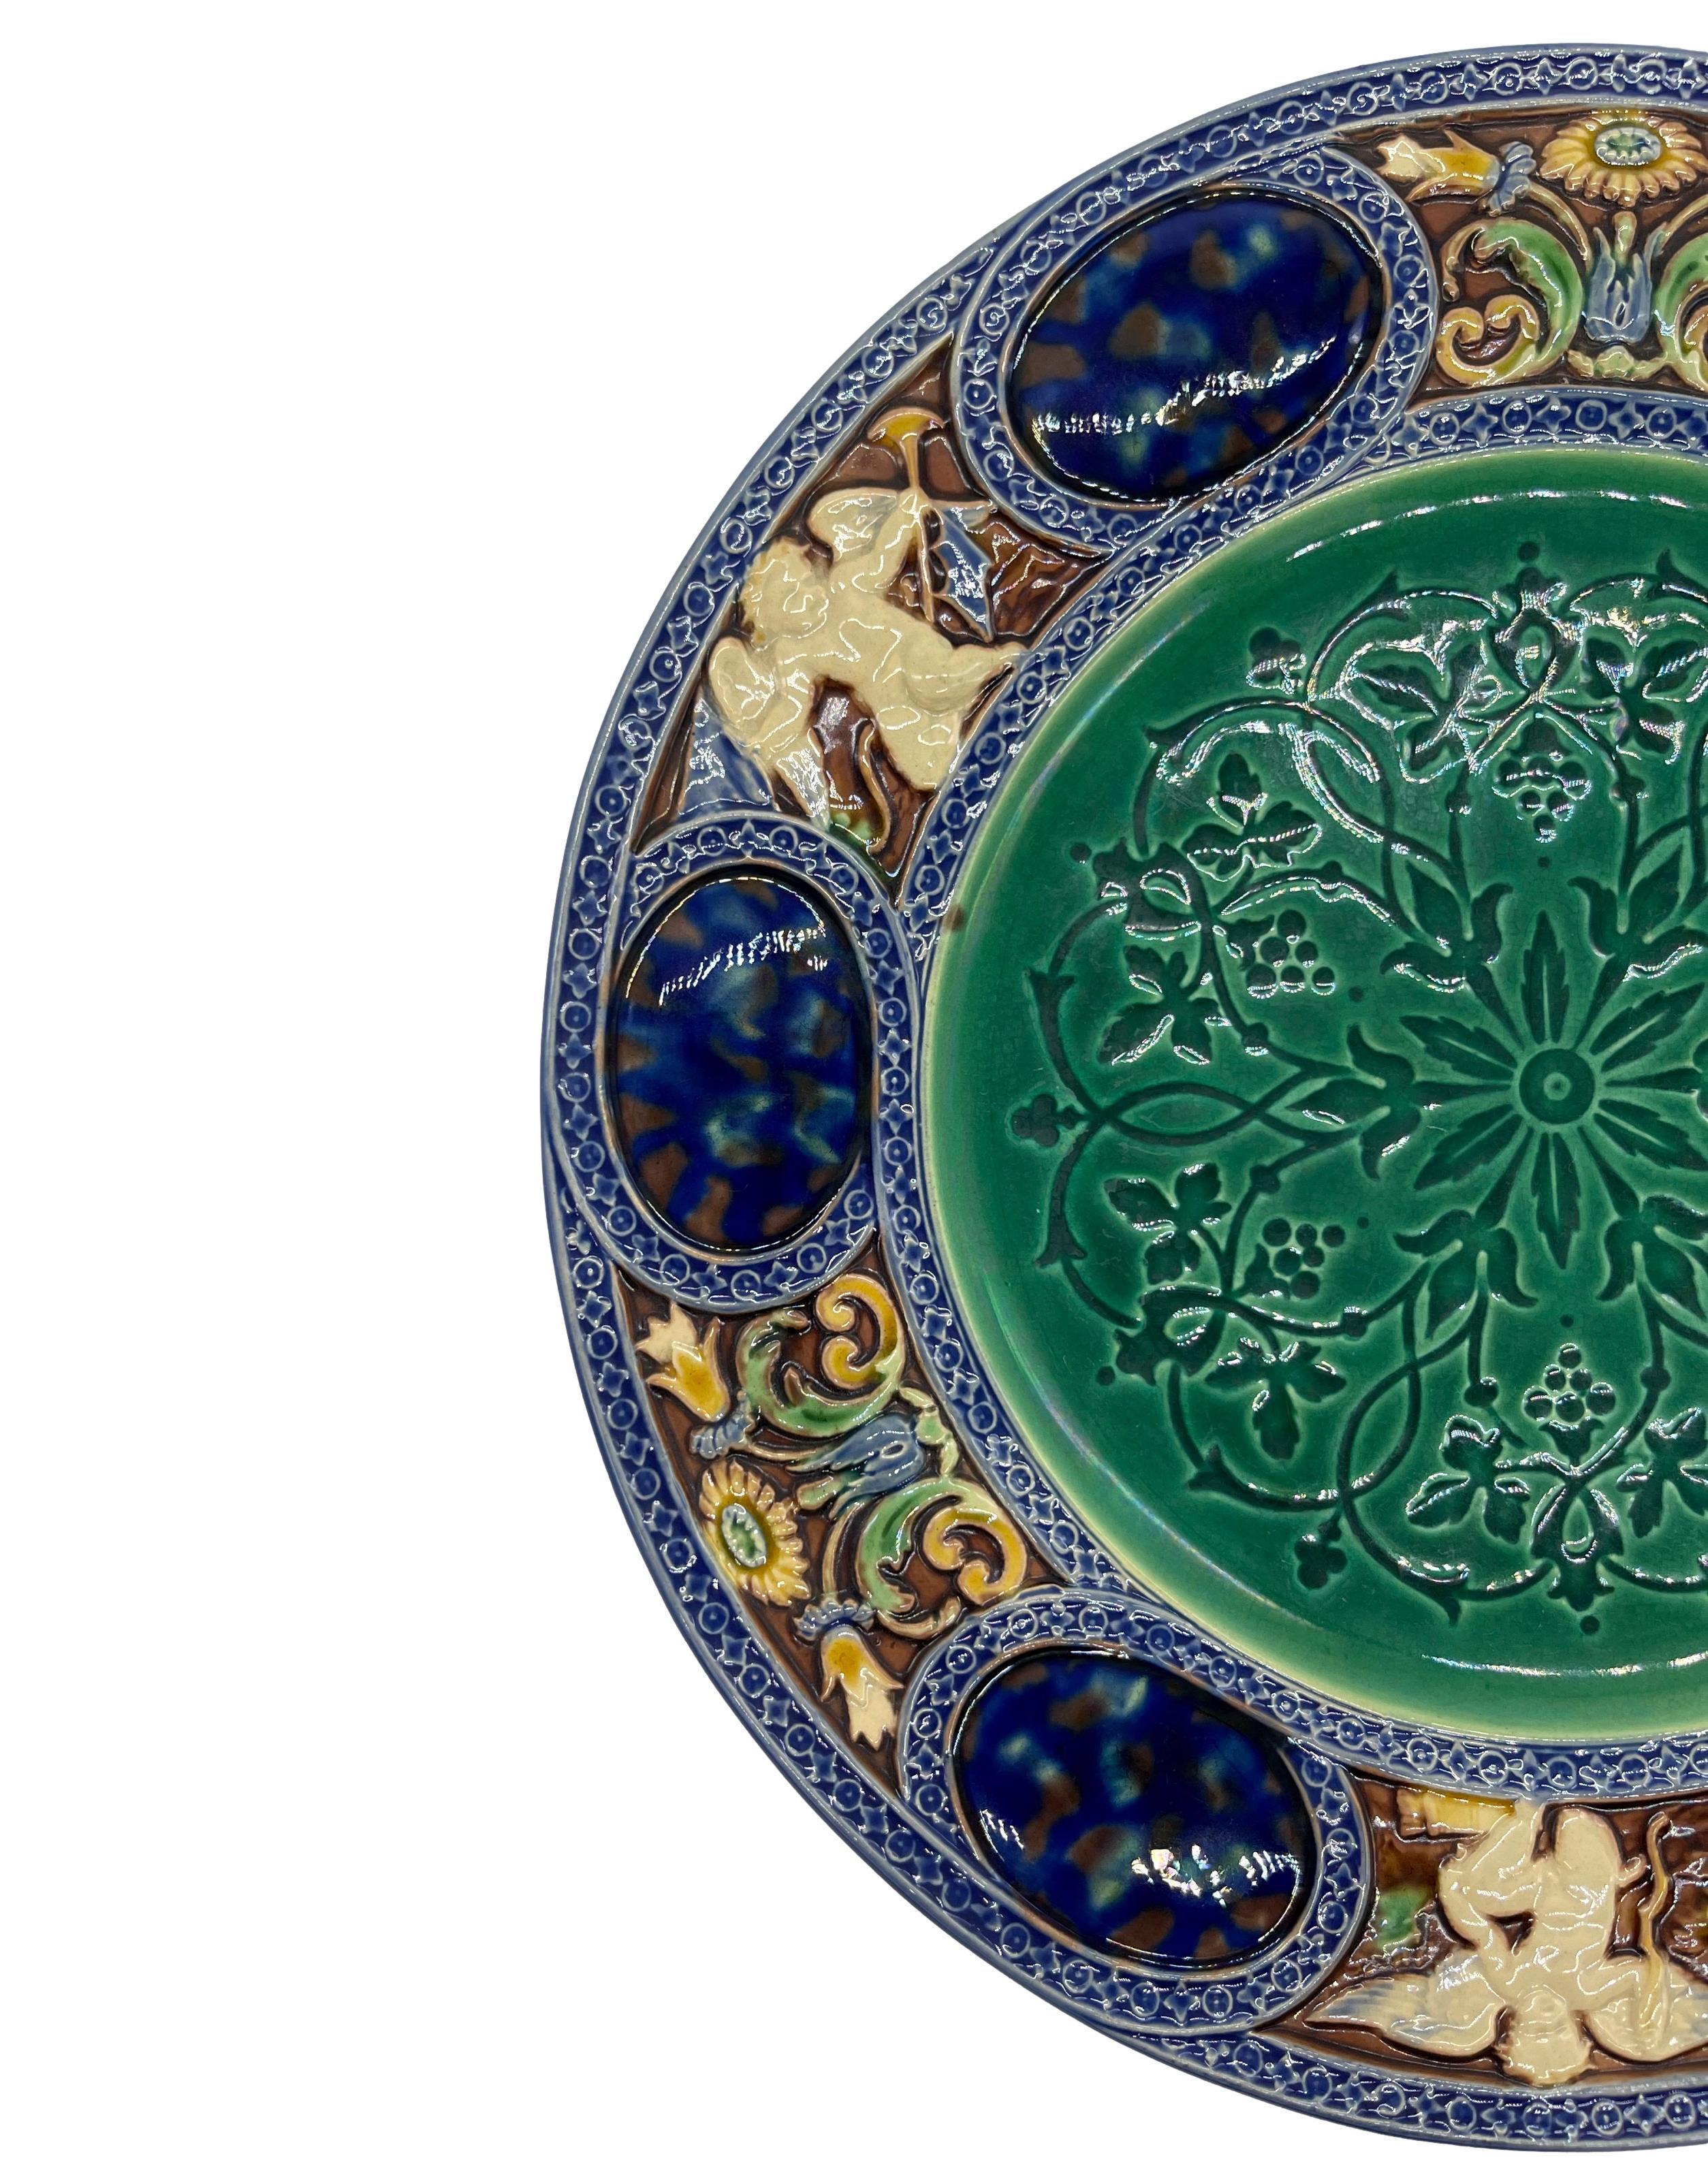 Minton Majolica Cabinet Plate, with a central medieval design in émail-ombrant, a difficult technique achieved by flooding majolica glazes over an intaglio design, causing the impressed cavities to appear as shadows of various depths; bordered with